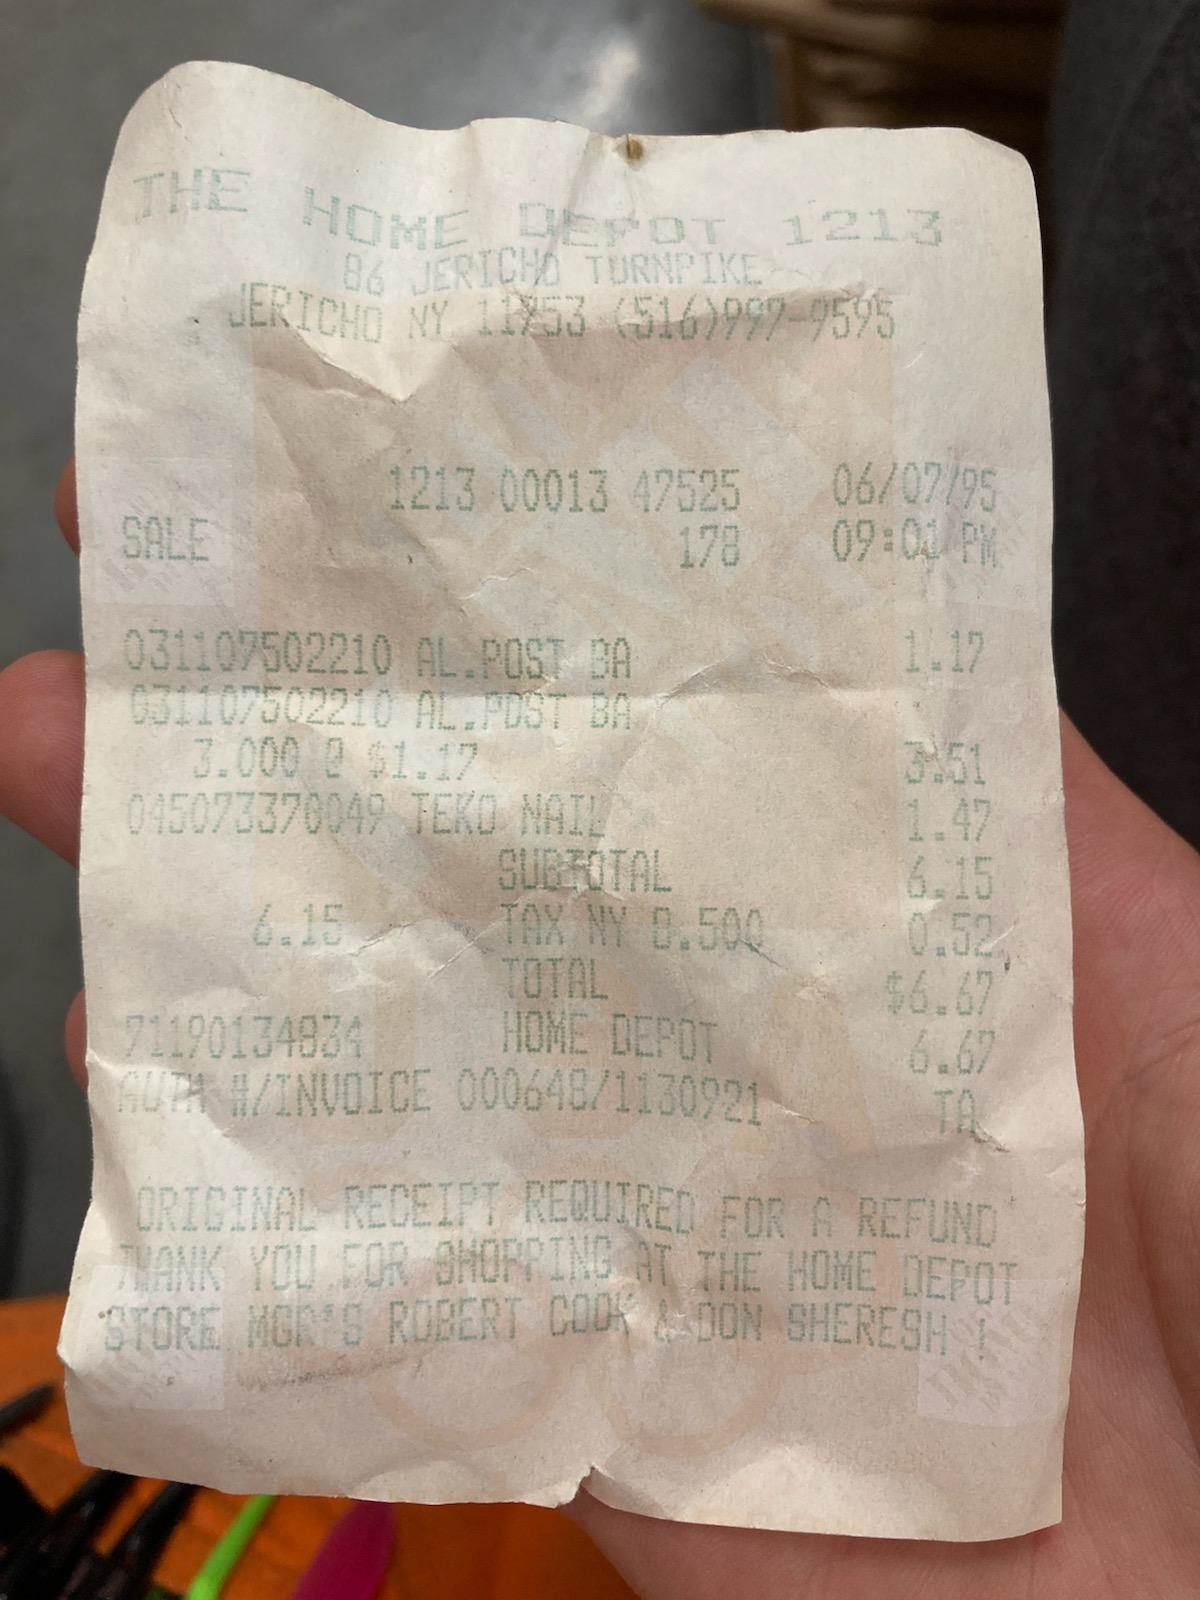 The image shows a receipt from The Home Depot, dated 06/07/95, from Jericho, NY. The purchased items include an AL post, a teko nail, and sales tax